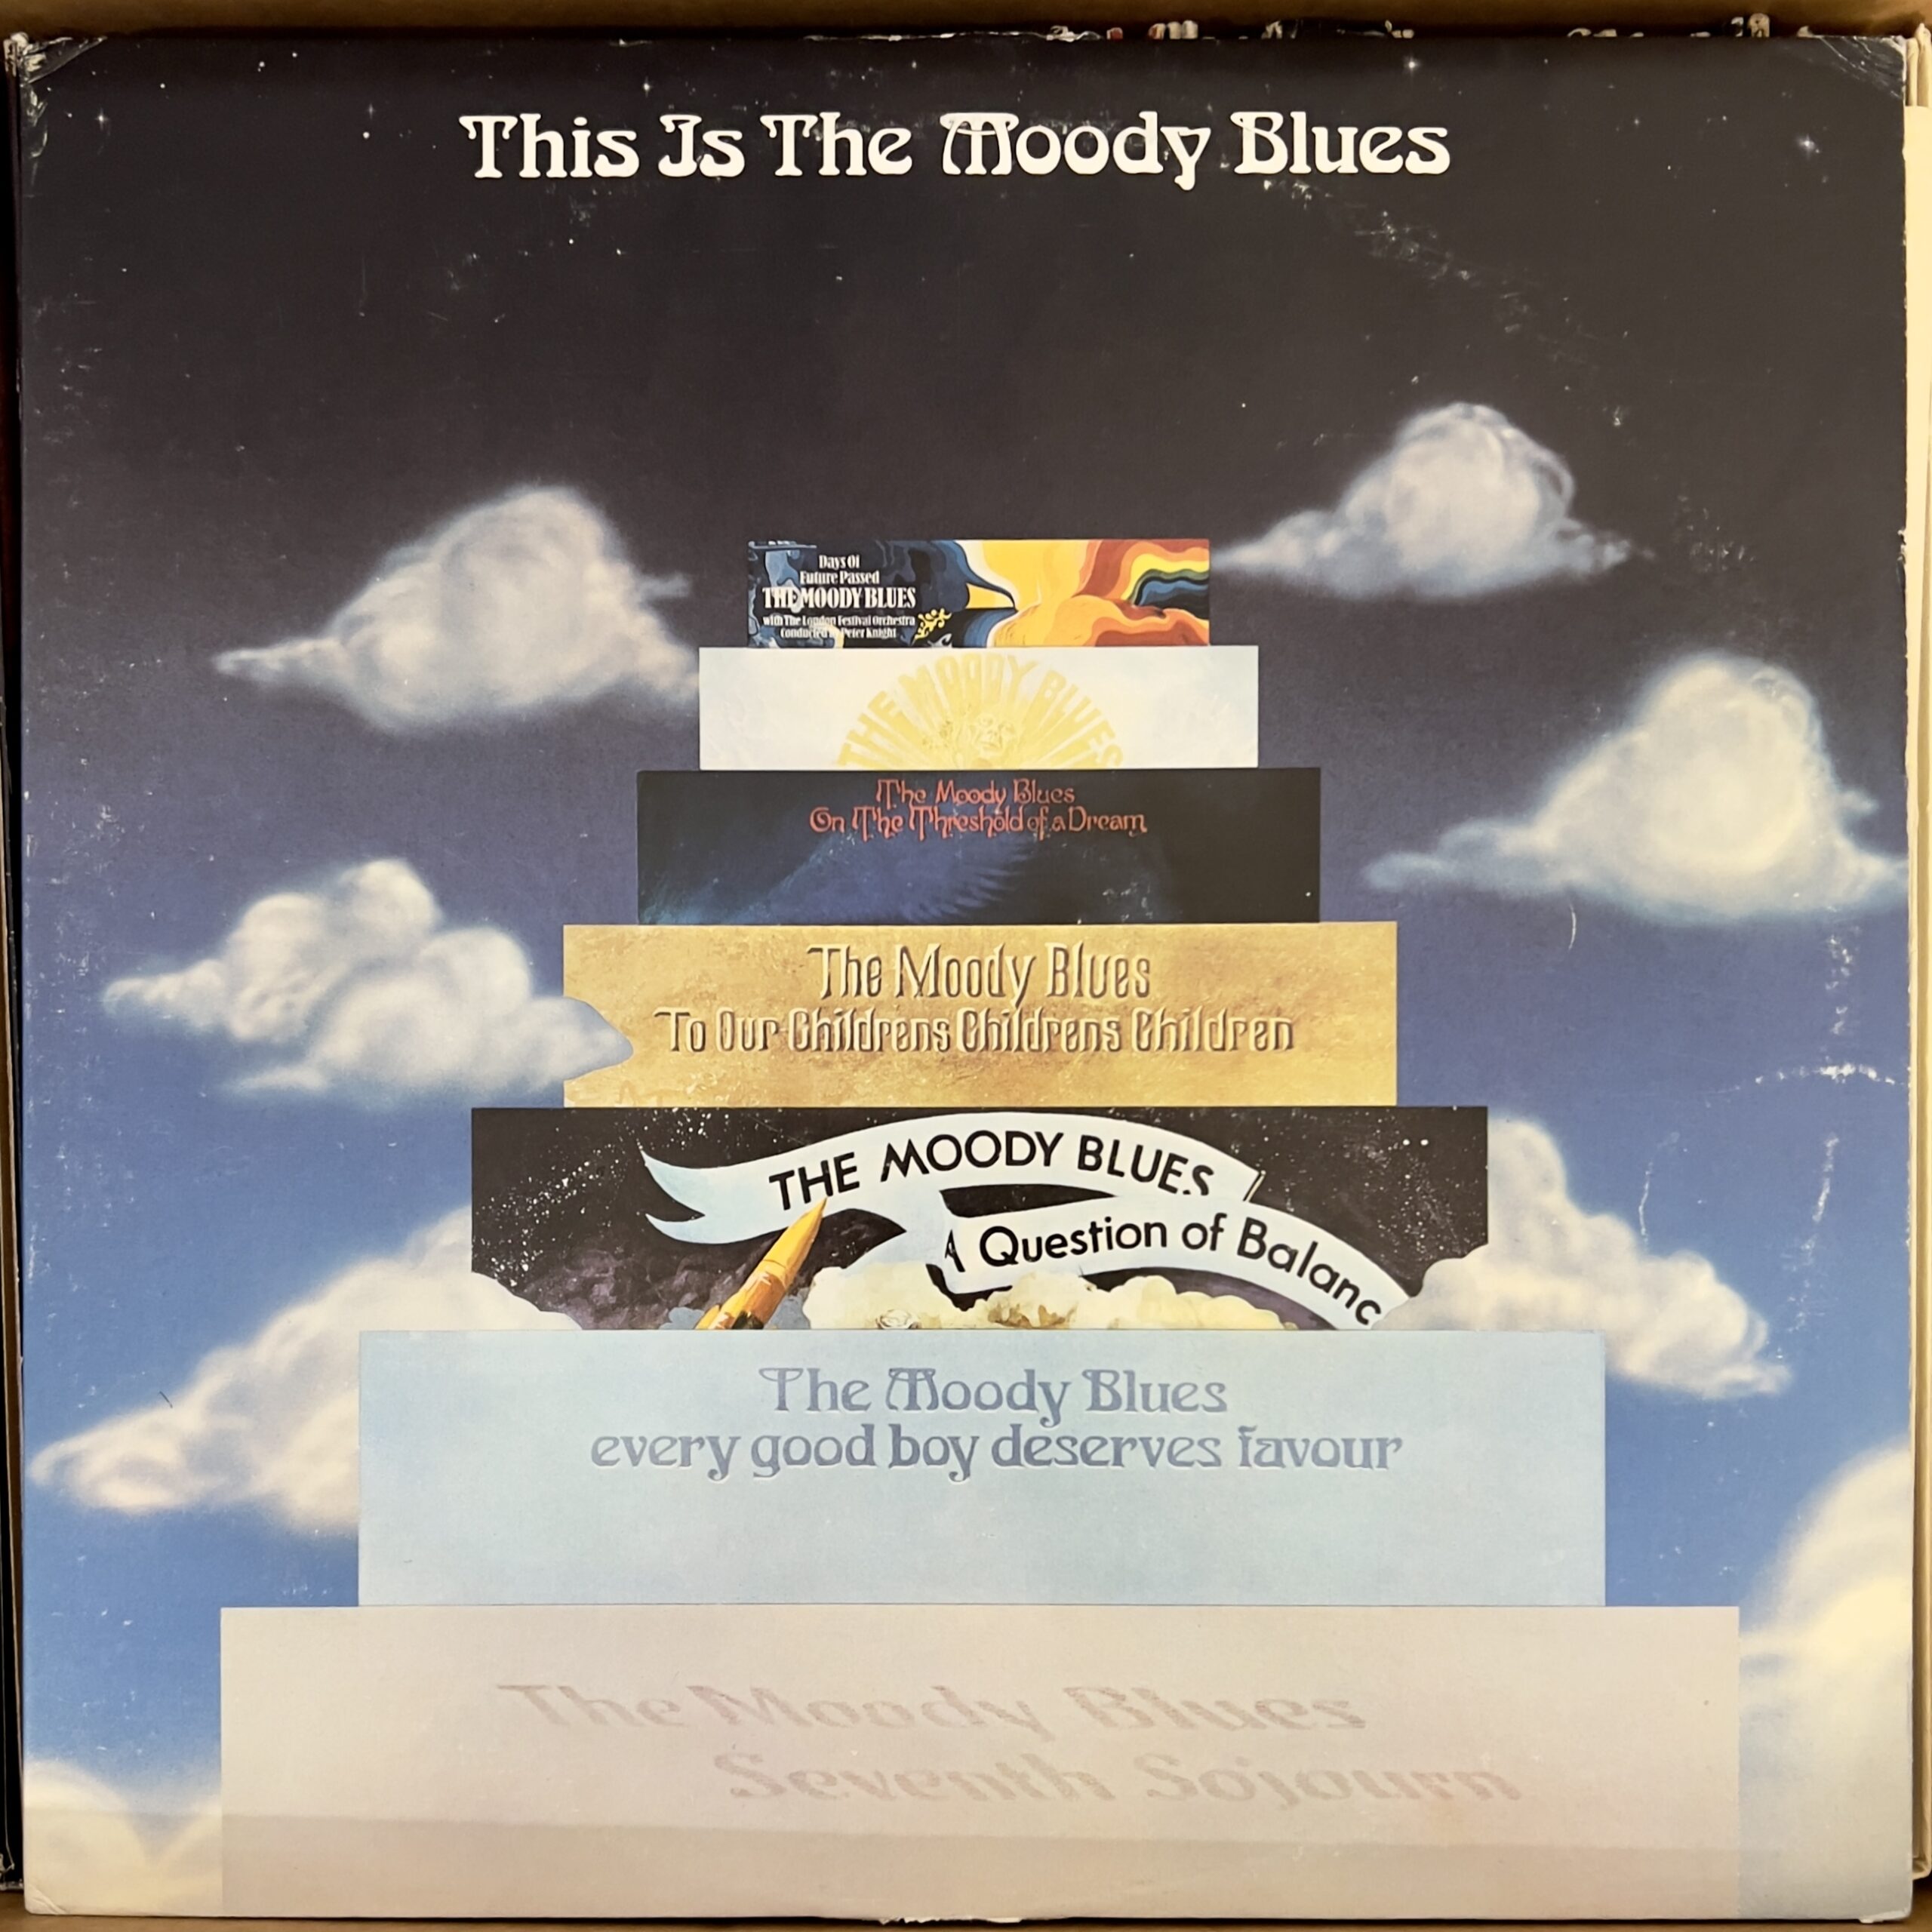 This Is The Moody Blues by The Moody Blues